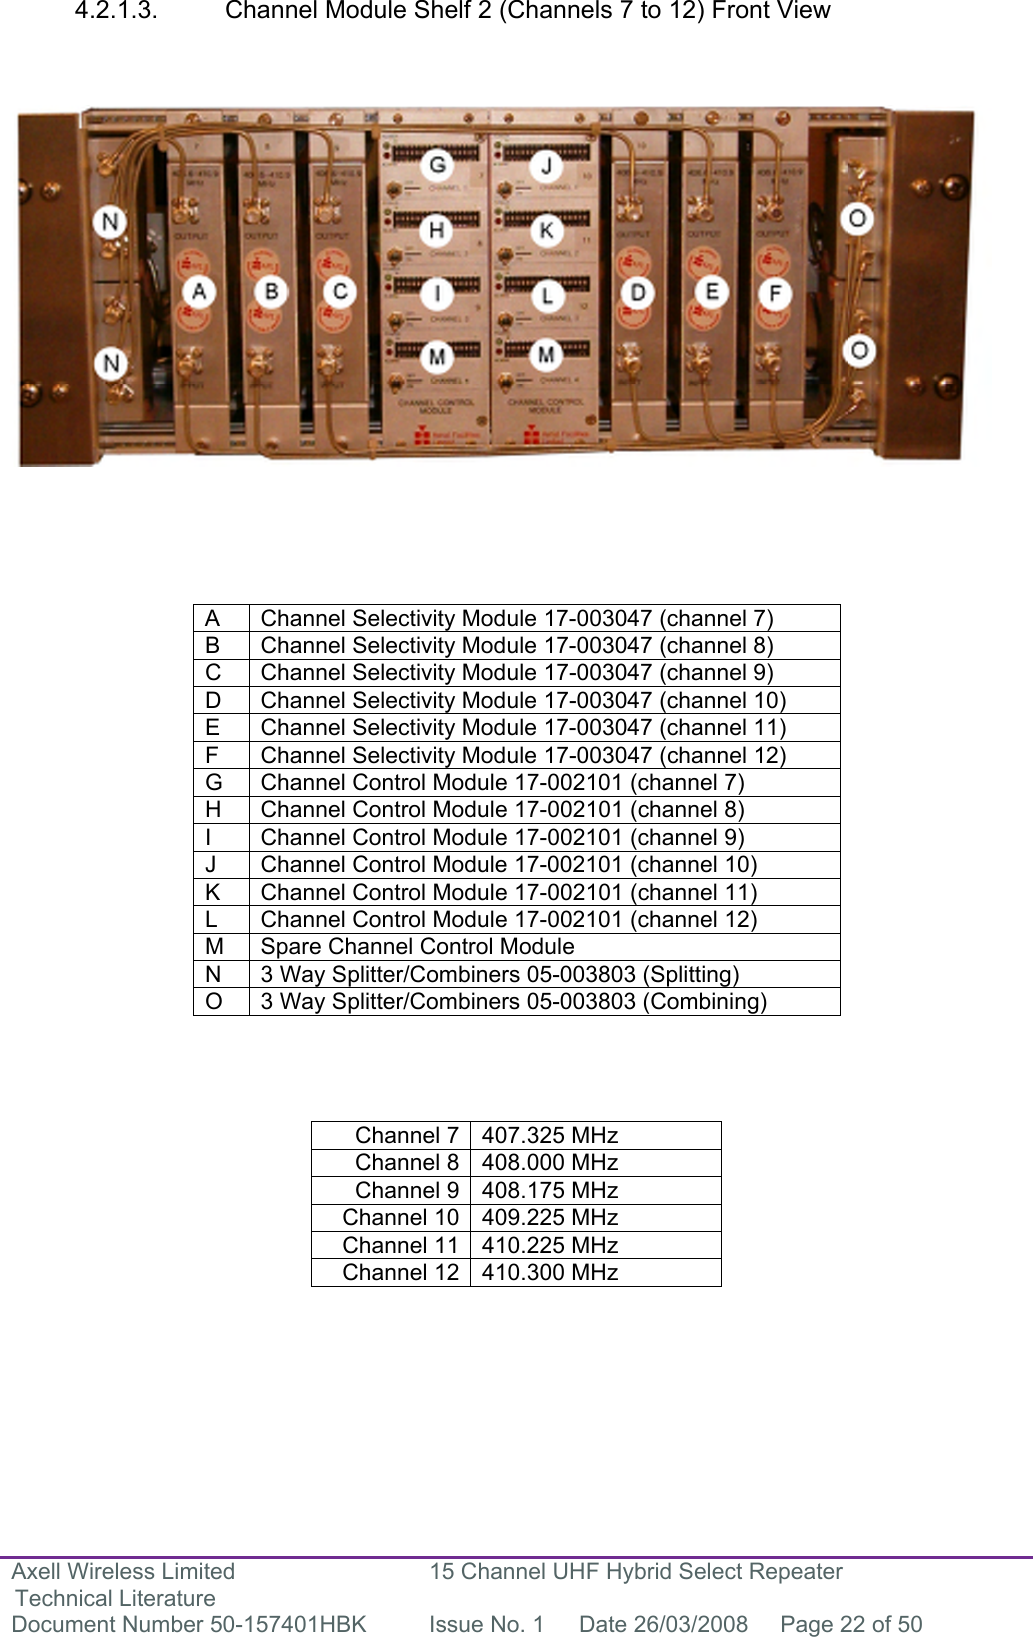 Axell Wireless Limited Technical Literature 15 Channel UHF Hybrid Select Repeater Document Number 50-157401HBK  Issue No. 1  Date 26/03/2008  Page 22 of 50   4.2.1.3.  Channel Module Shelf 2 (Channels 7 to 12) Front View                       A  Channel Selectivity Module 17-003047 (channel 7) B  Channel Selectivity Module 17-003047 (channel 8) C  Channel Selectivity Module 17-003047 (channel 9) D  Channel Selectivity Module 17-003047 (channel 10) E  Channel Selectivity Module 17-003047 (channel 11) F  Channel Selectivity Module 17-003047 (channel 12) G  Channel Control Module 17-002101 (channel 7) H  Channel Control Module 17-002101 (channel 8) I  Channel Control Module 17-002101 (channel 9) J  Channel Control Module 17-002101 (channel 10) K  Channel Control Module 17-002101 (channel 11) L  Channel Control Module 17-002101 (channel 12) M  Spare Channel Control Module  N  3 Way Splitter/Combiners 05-003803 (Splitting) O  3 Way Splitter/Combiners 05-003803 (Combining)     Channel 7 407.325 MHz Channel 8 408.000 MHz Channel 9 408.175 MHz Channel 10 409.225 MHz Channel 11 410.225 MHz Channel 12 410.300 MHz          